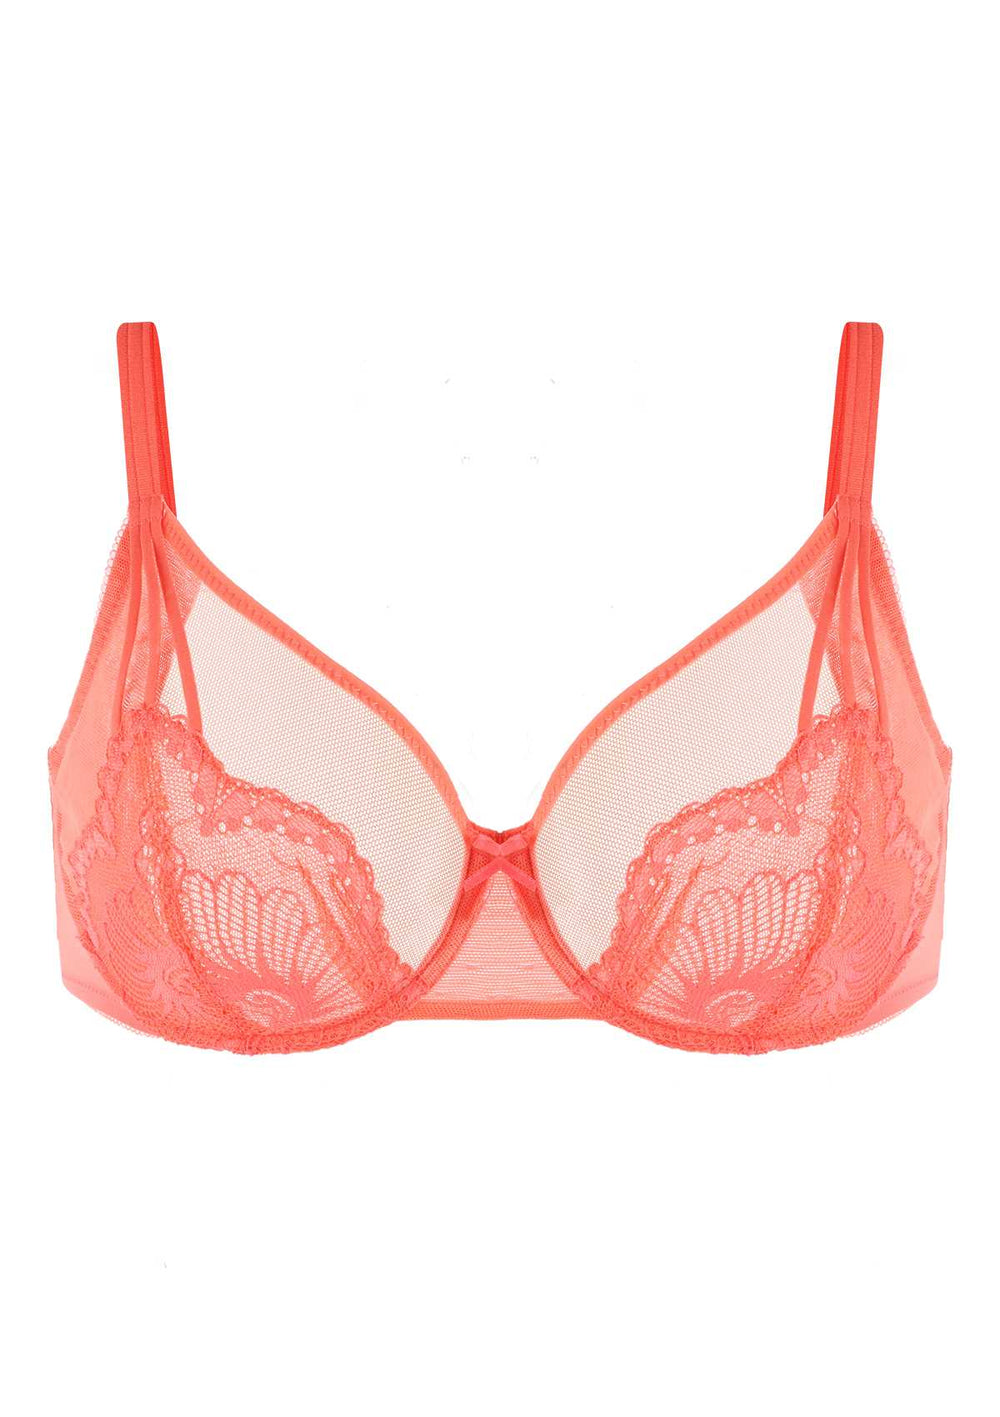 Buy HSIA Minimizer Bra for Women,Unlined Non Padded Lace Sexy Plus